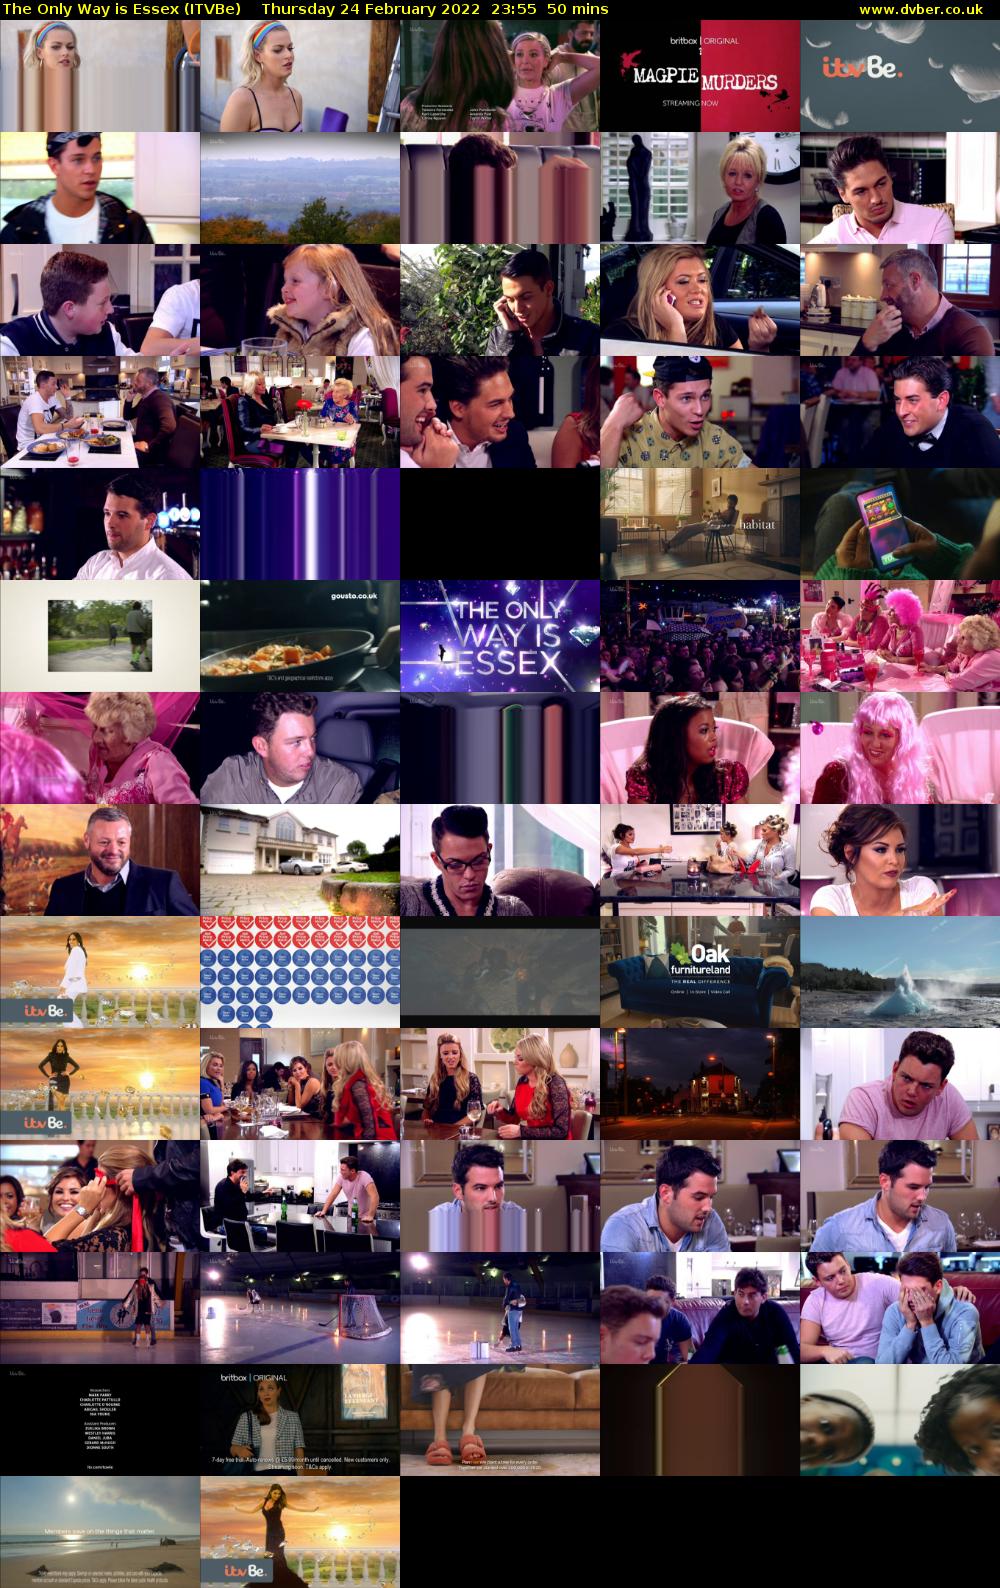 The Only Way is Essex (ITVBe) Thursday 24 February 2022 23:55 - 00:45